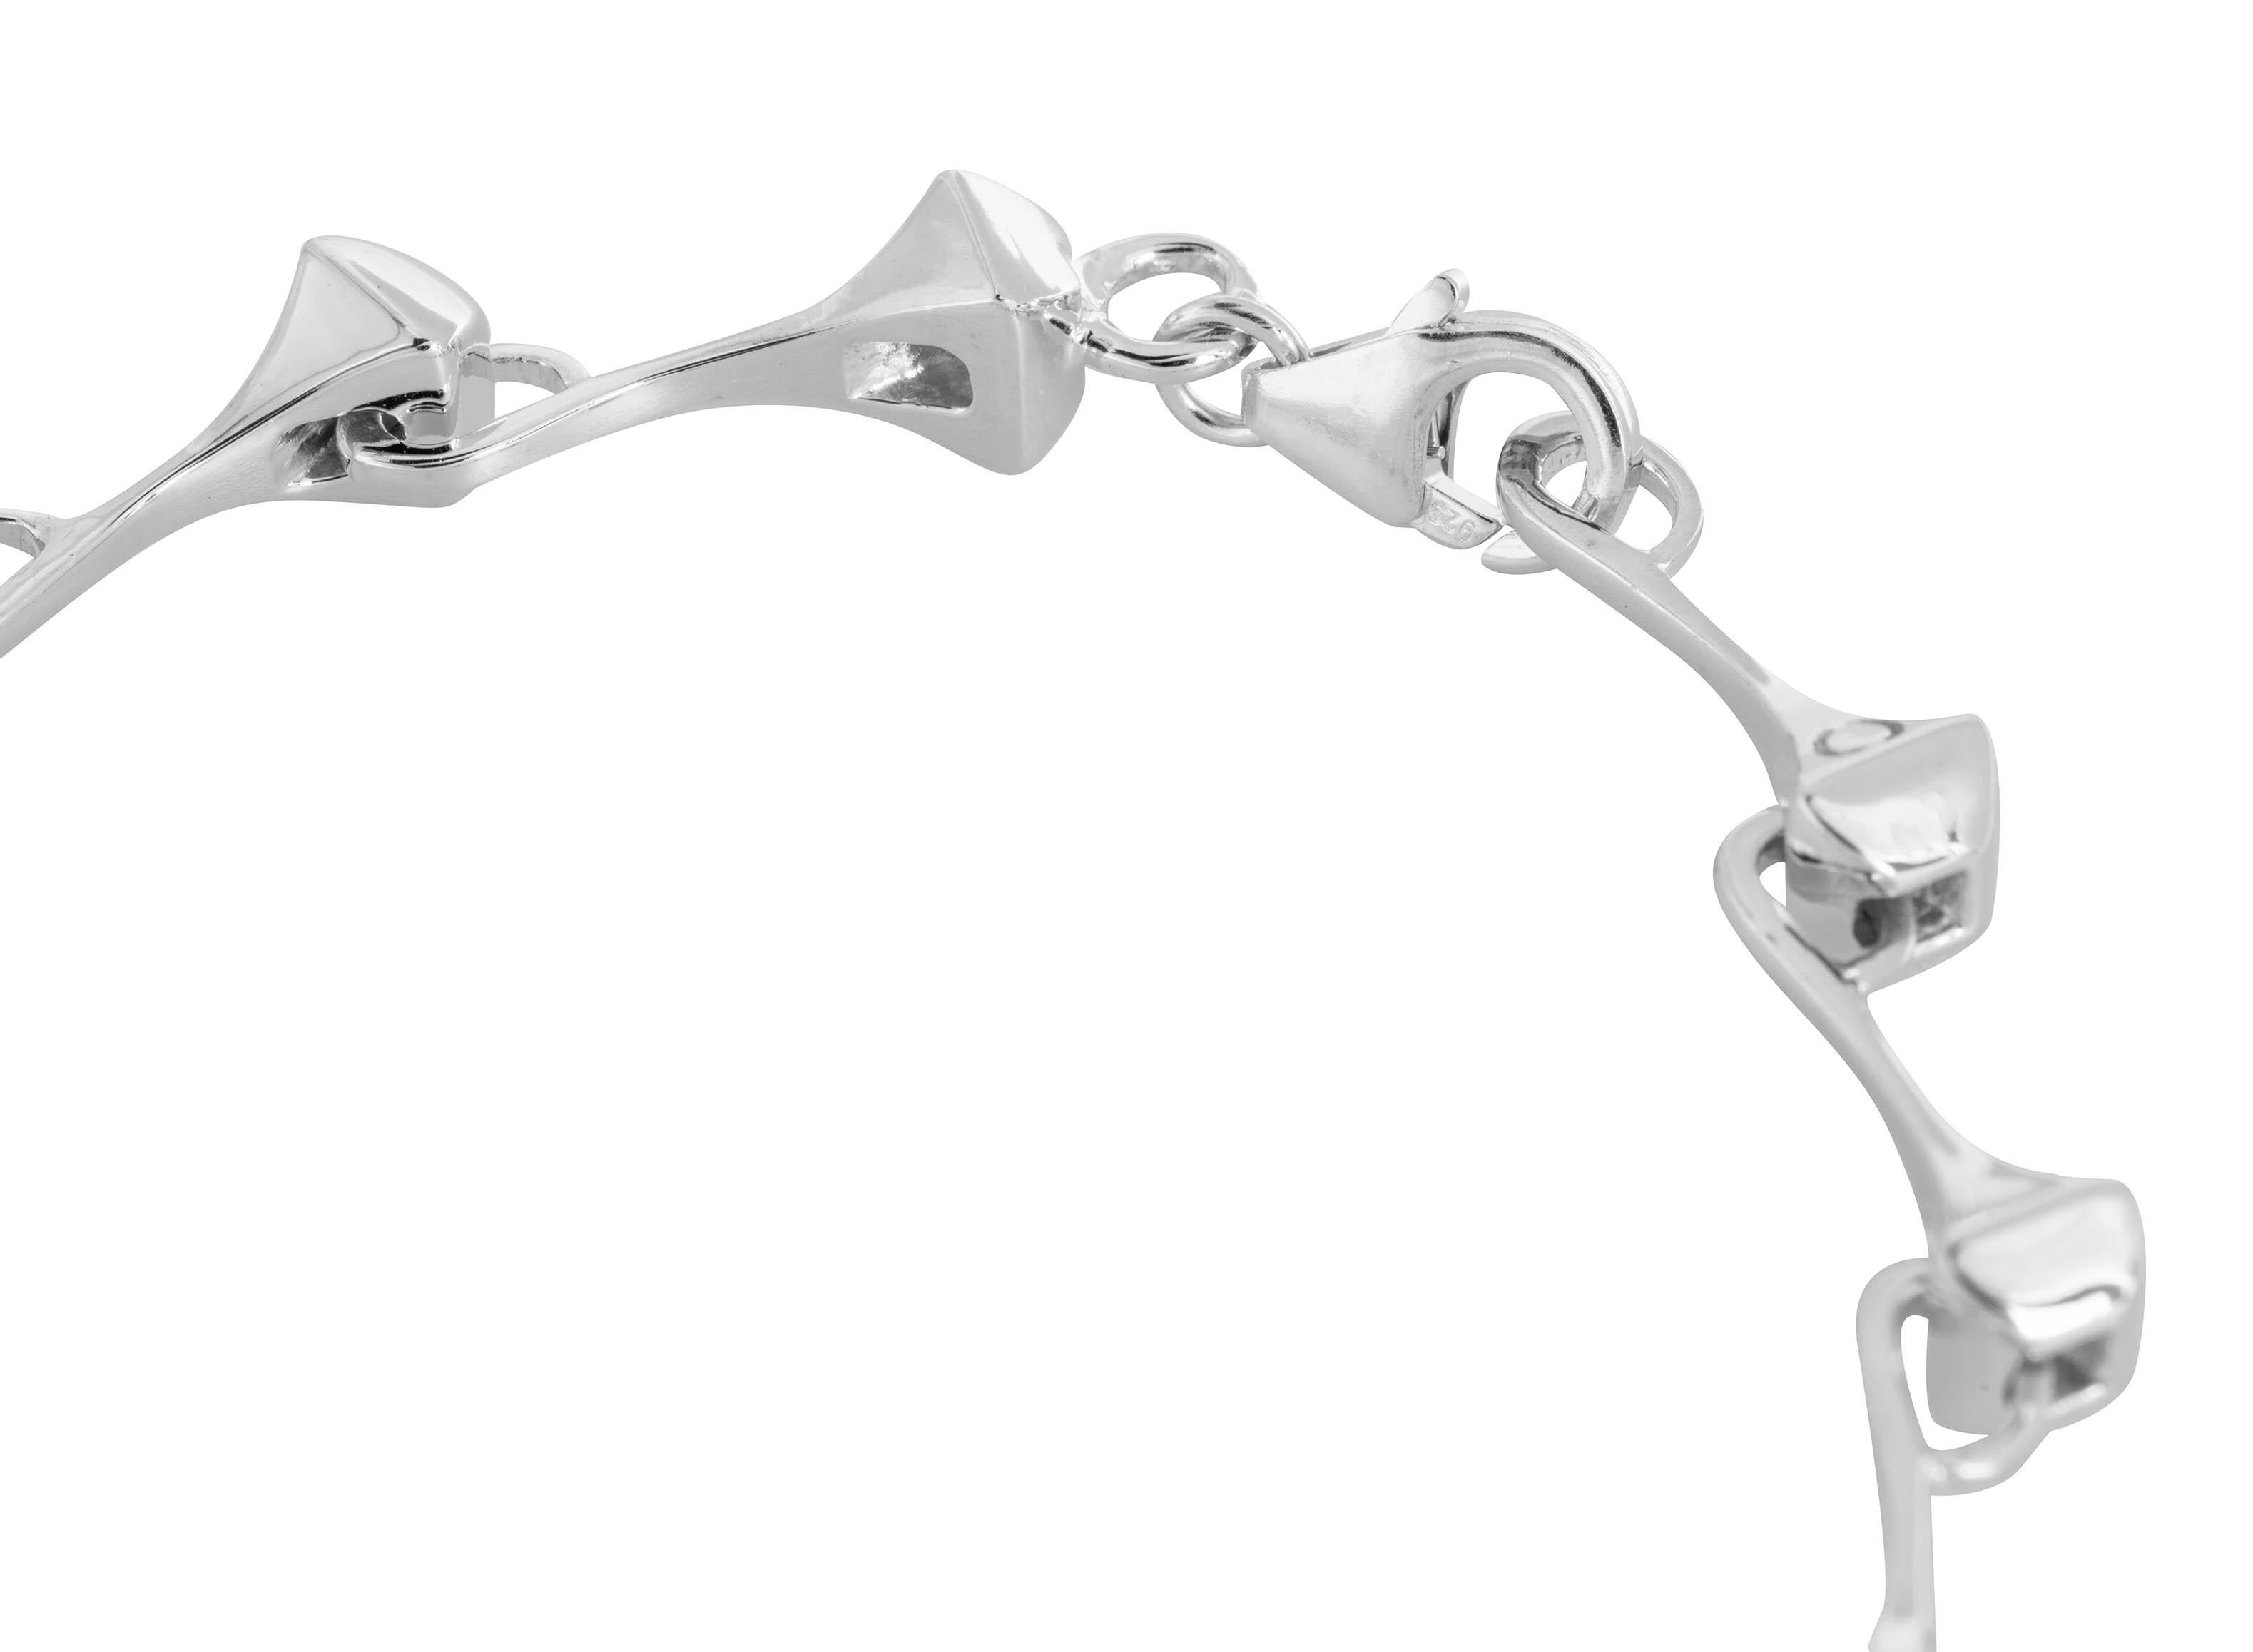 Unisex chain bracelet in polished sterling silver
The design has a rock ‘n’ roll vibe and it is inspired by the equestrian world, as the links of the necklace have a shape, which reminds the horseshoe nails. This collection is also influenced by the